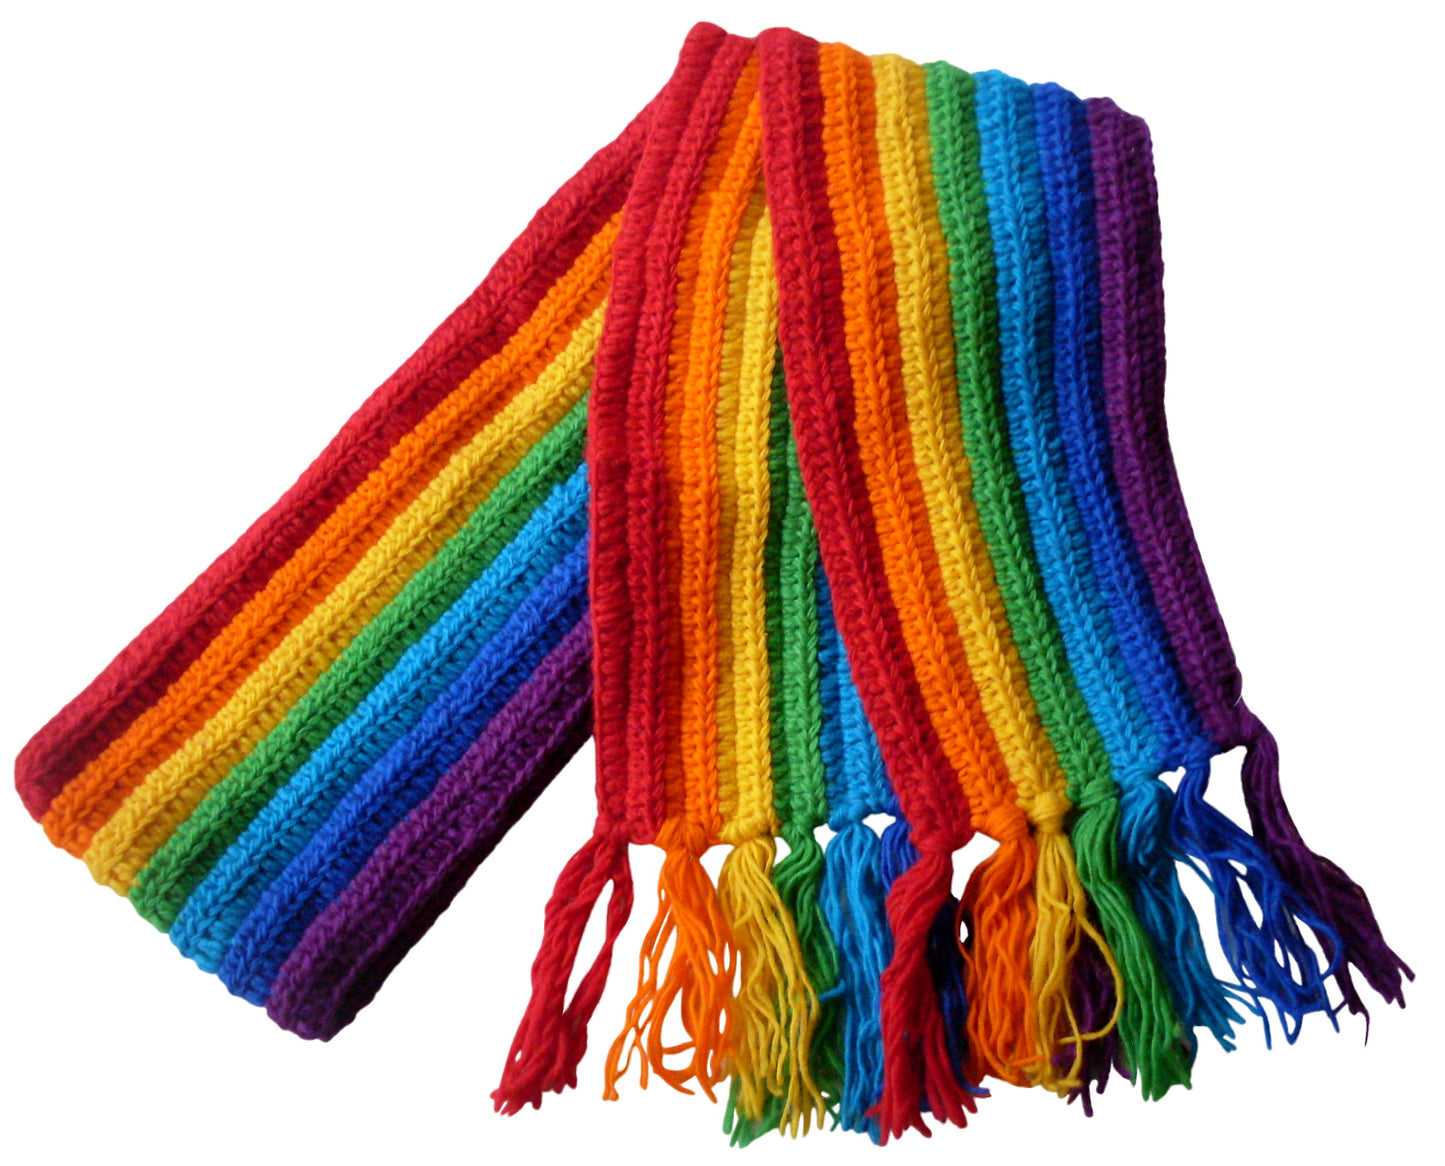 Main image of rainbow striped wool scarf with tassels. Hand knitted in Nepal.